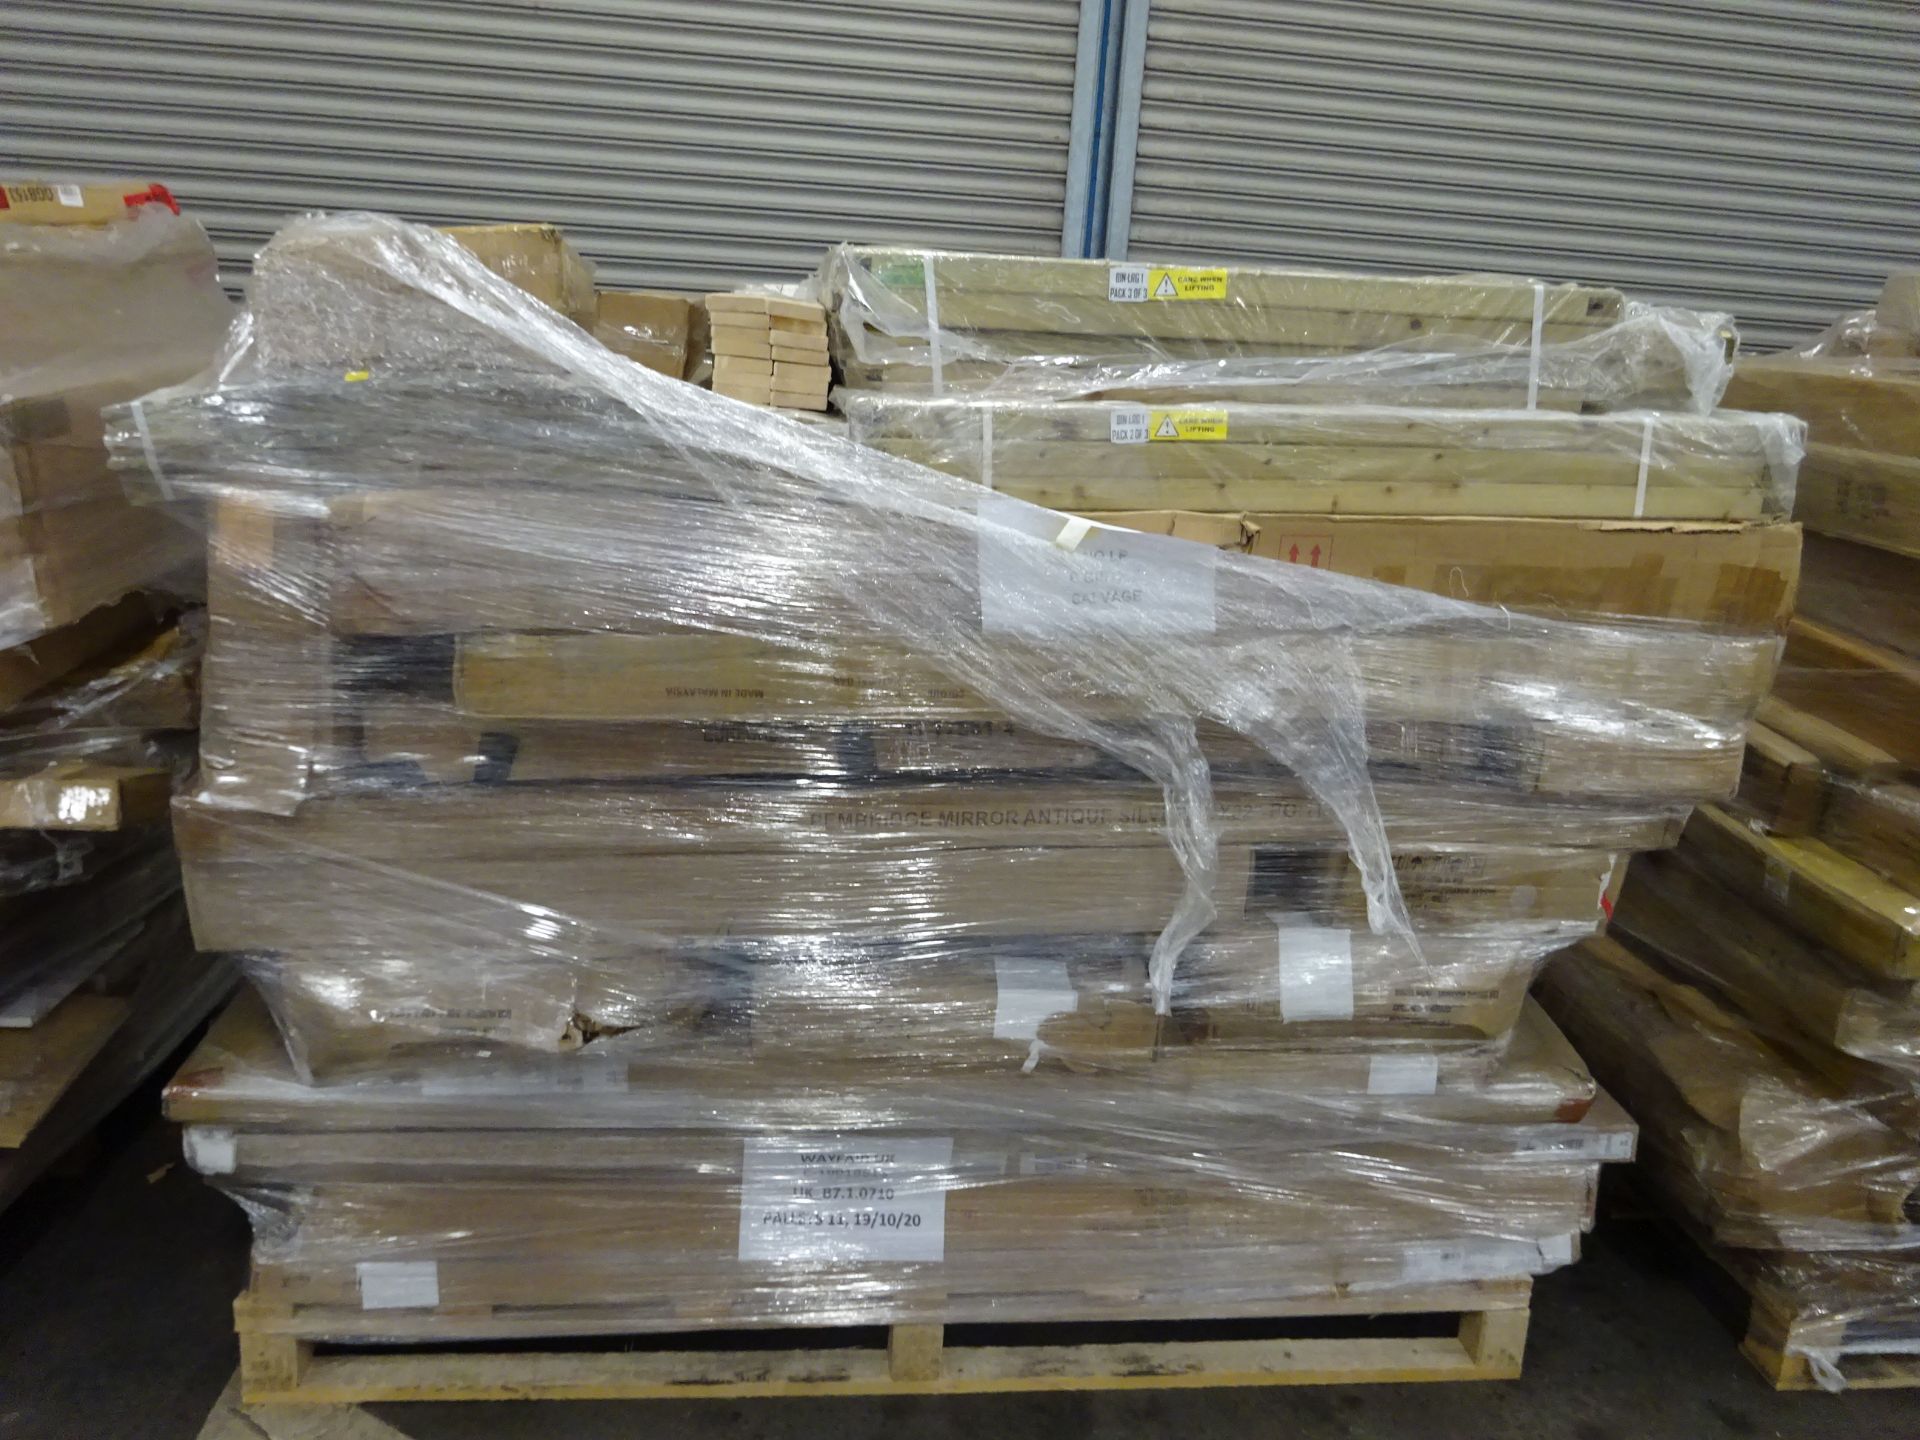 LG DOUBLE PALLET OF UNTESTED WAYFAIR CUSTOMER RETURNS (NO MANIFEST). WE HAVE NOT TOUCHED OR PICKED - Image 3 of 3